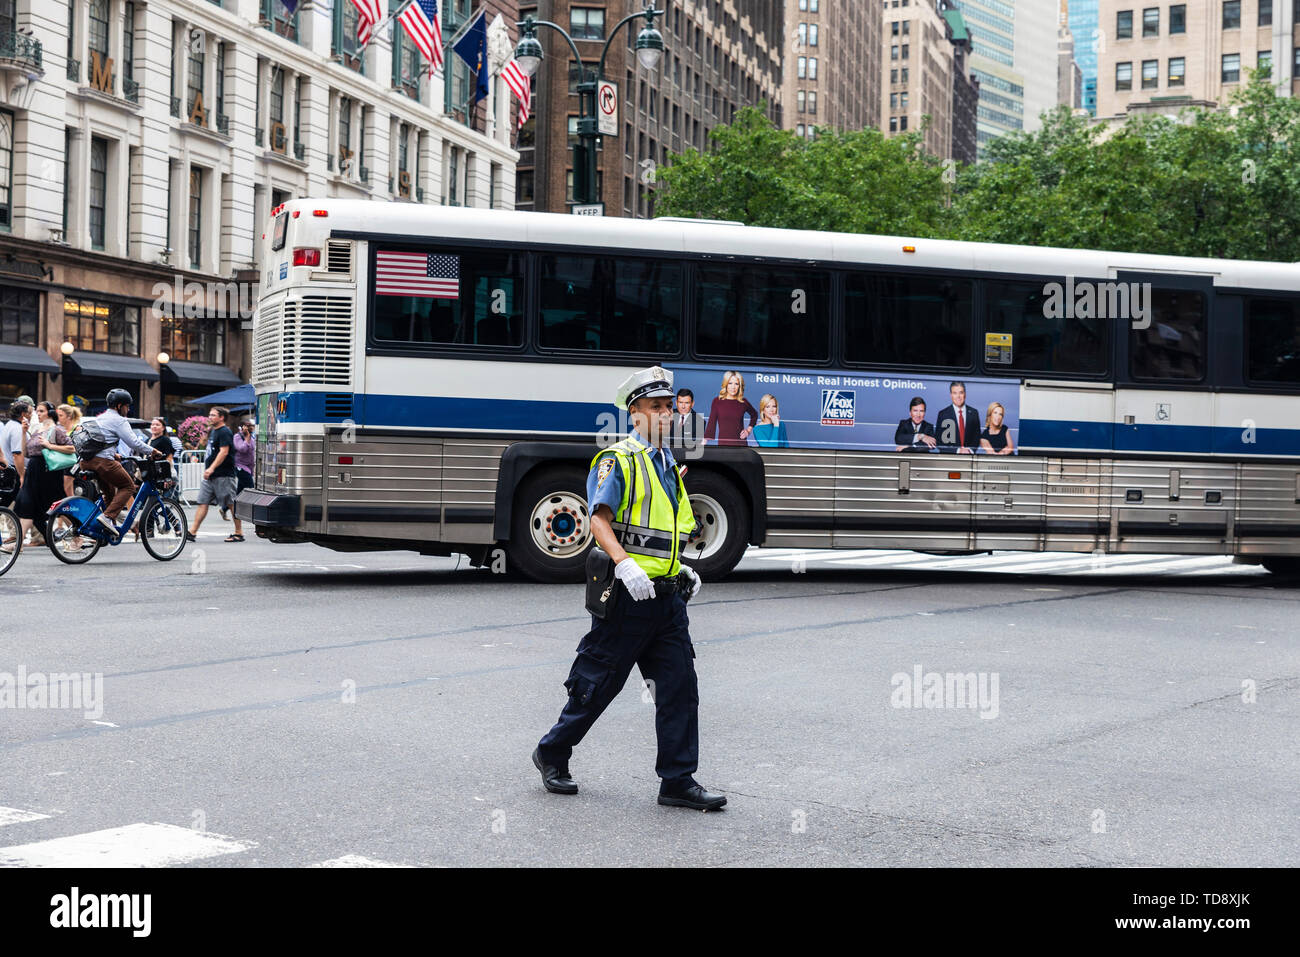 New York City, USA - July 31, 2018: Police directing the traffic with people around in Manhattan, New York City, USA Stock Photo